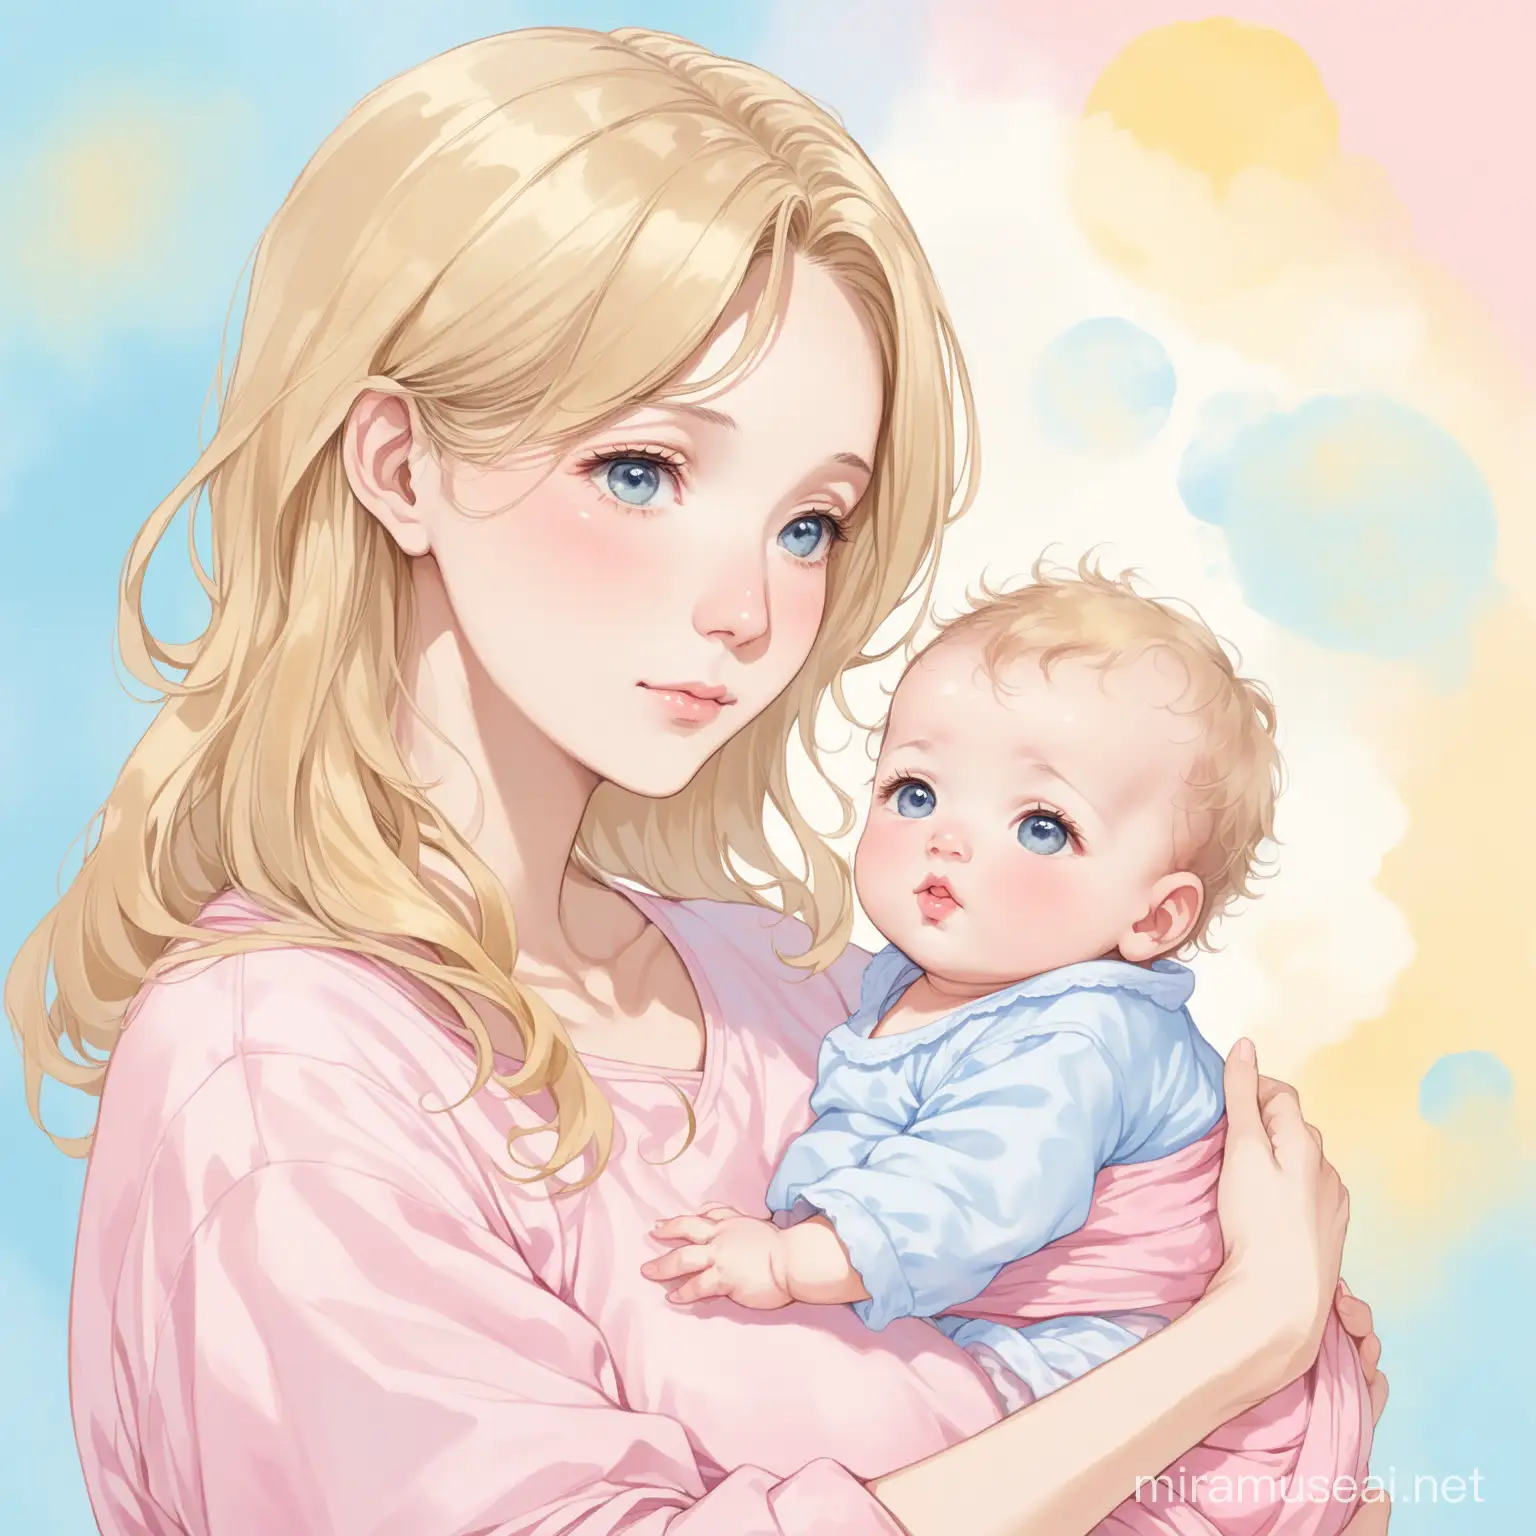 woman around 30 with dirty blonde hair, grandmother from heaven holding her baby. In the background are miscarried babies  in different stages of development. background is dreamy pastels of pink, blue, and yellow